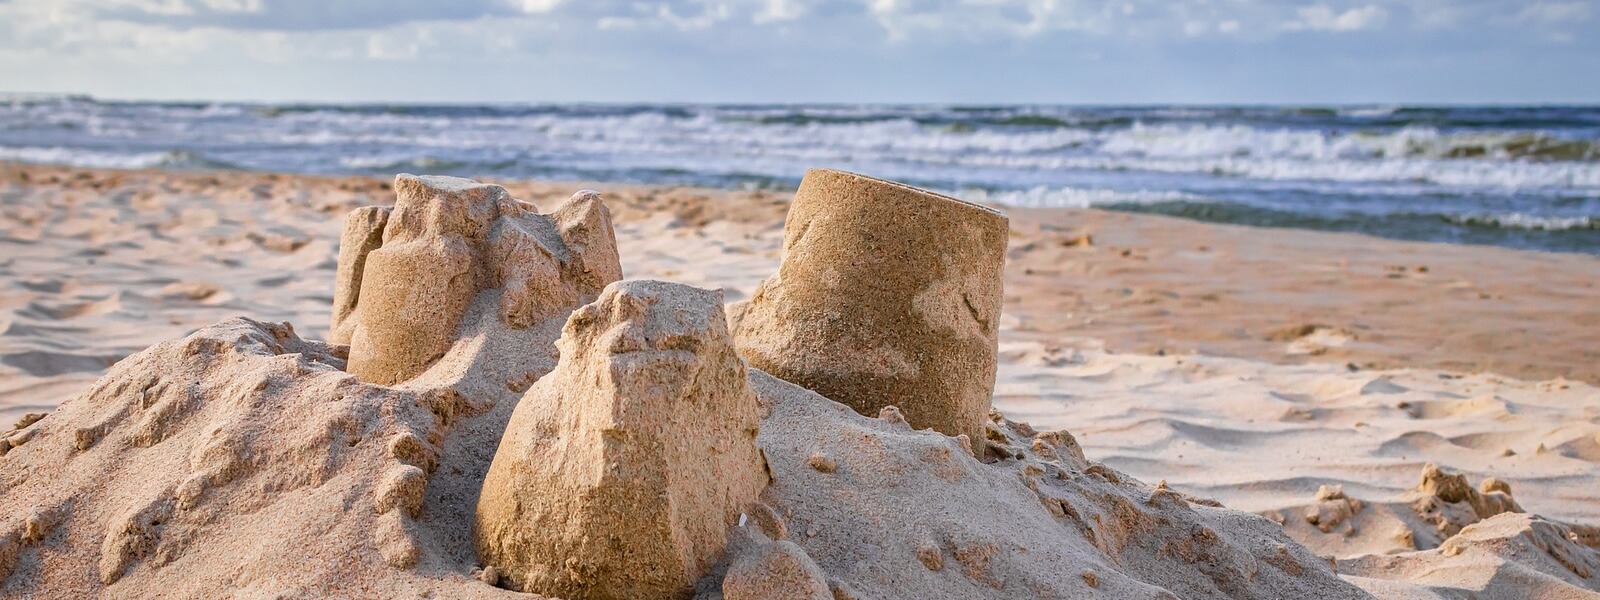 Sandcastles on a beach, eroding in the wind. The sea is in the background.